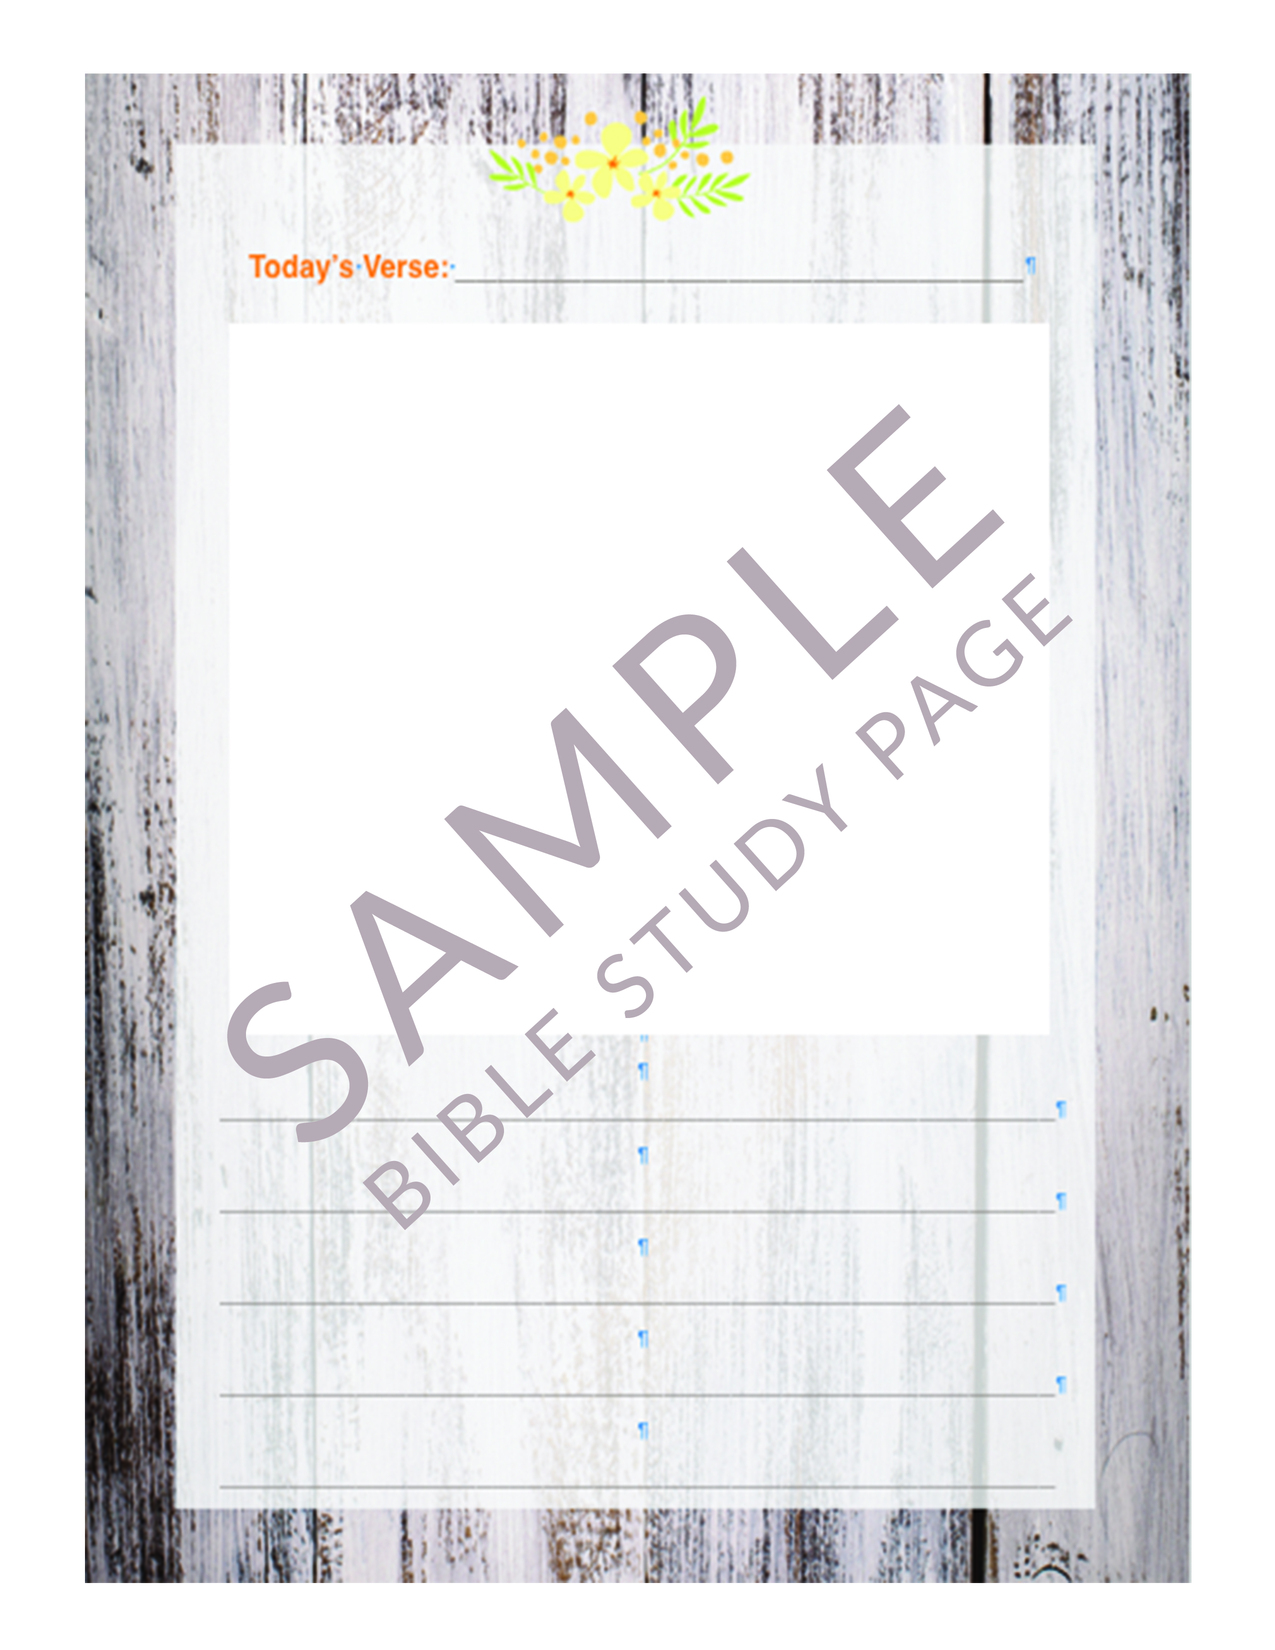 easter bible study | easter bible study lessons printable | easter bible study youth | easter bible study lessons | easter bible studies